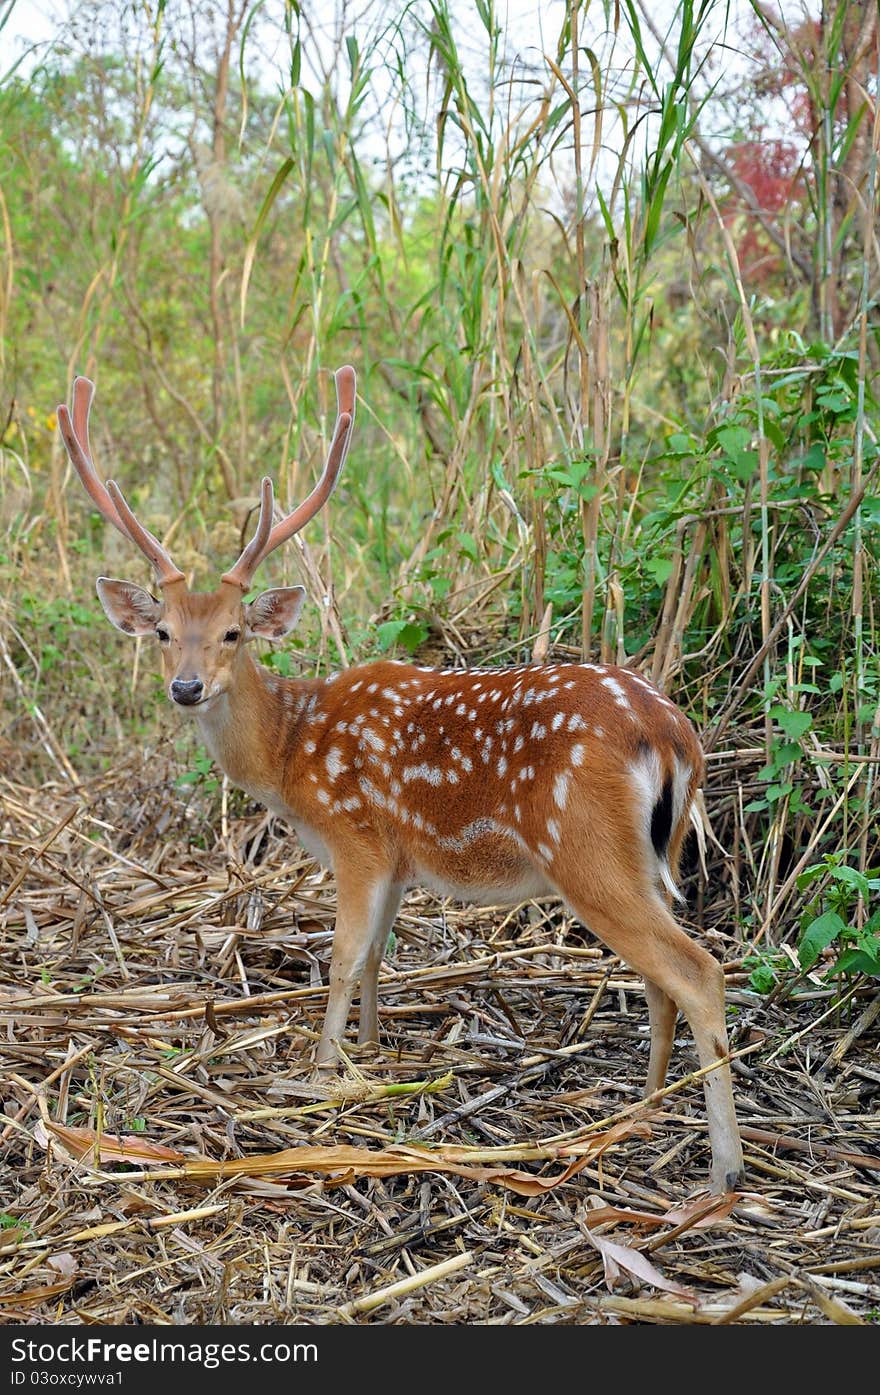 The Sika Deer, Cervus nippon, also known as the Spotted Deer or the Japanese Deer, is a species of deer native to much of East Asia and introduced to various other parts of the world.